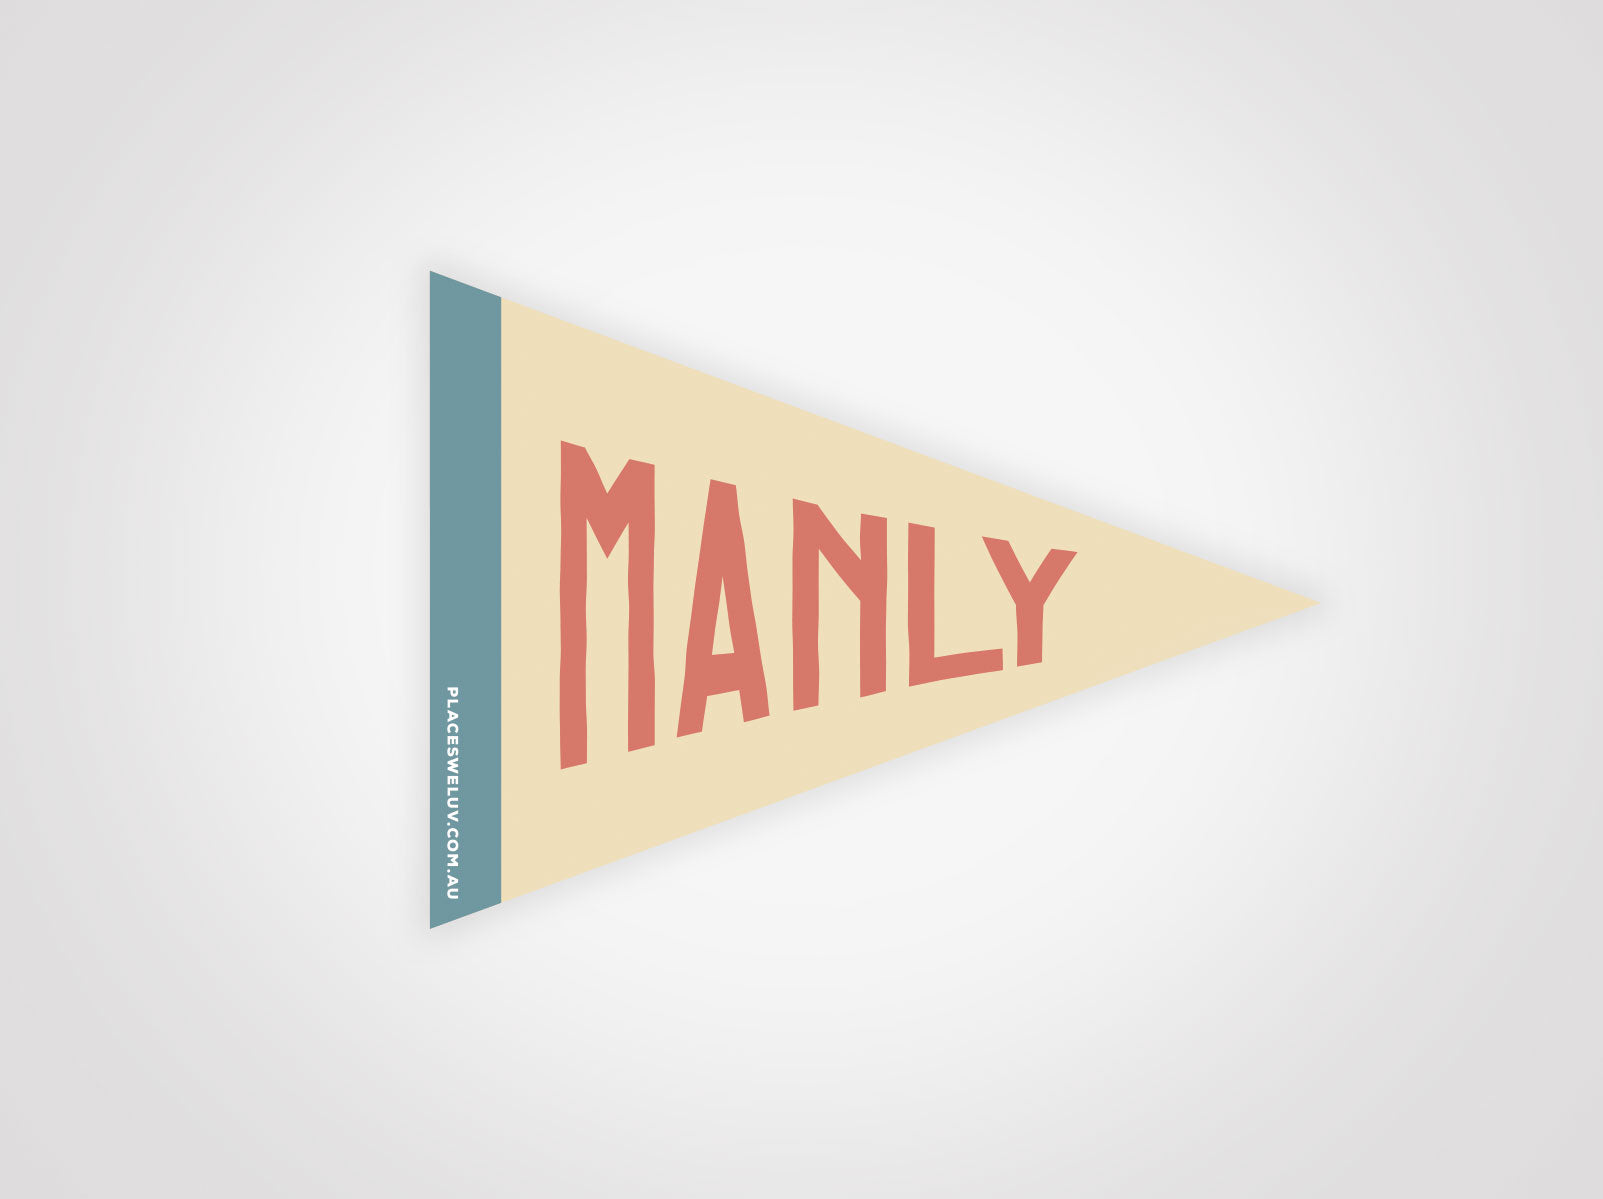 Manly Beach vintage travel style flag decals by places we luv